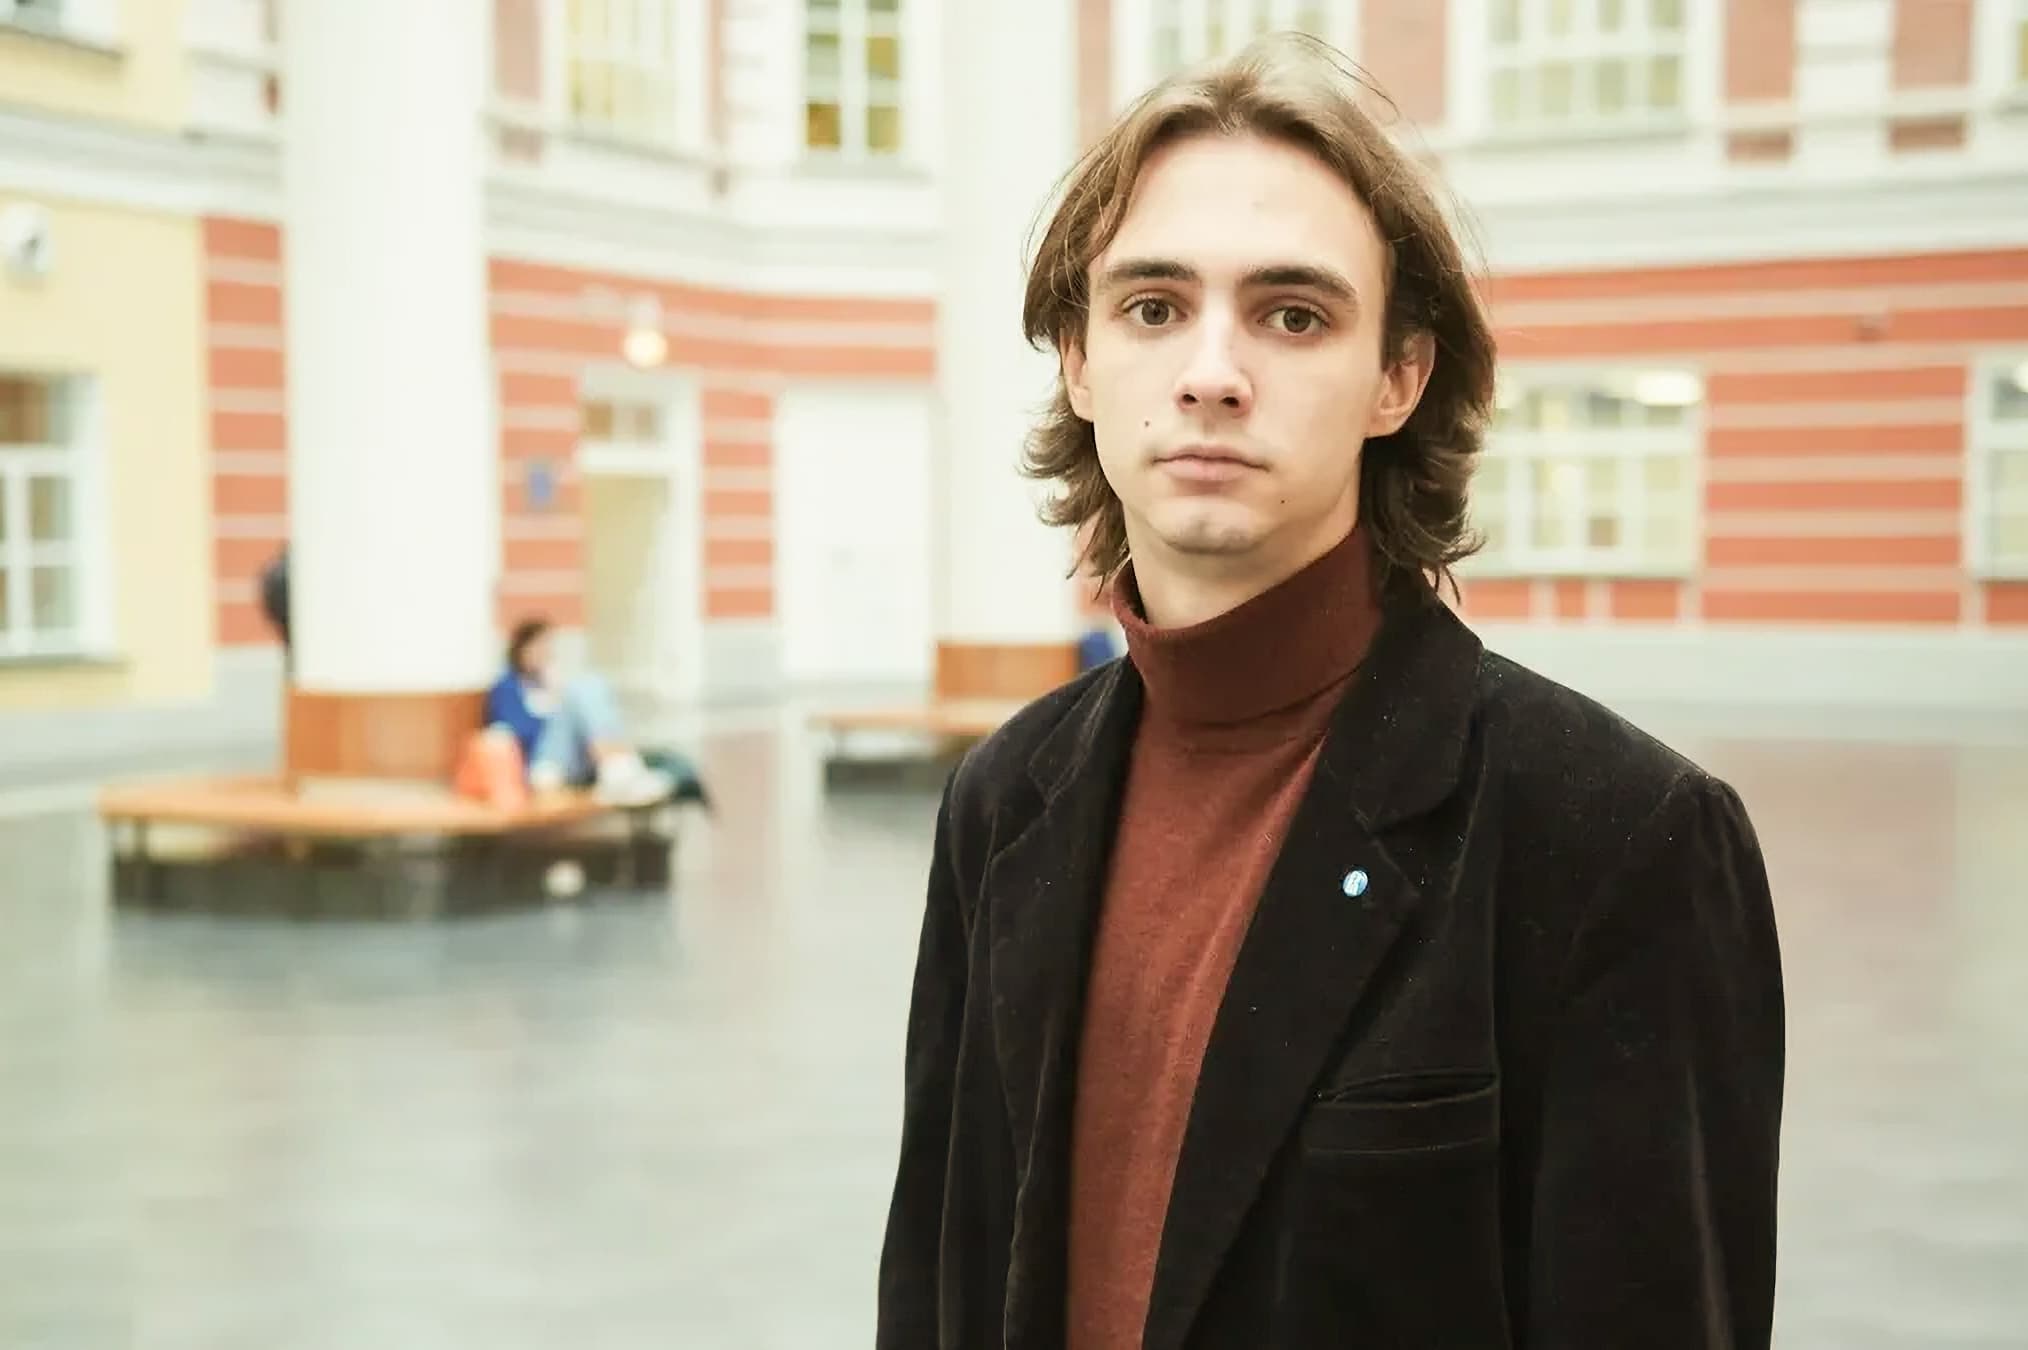 Russian Student Sent to Prison for Displaying LGBTQ Symbols